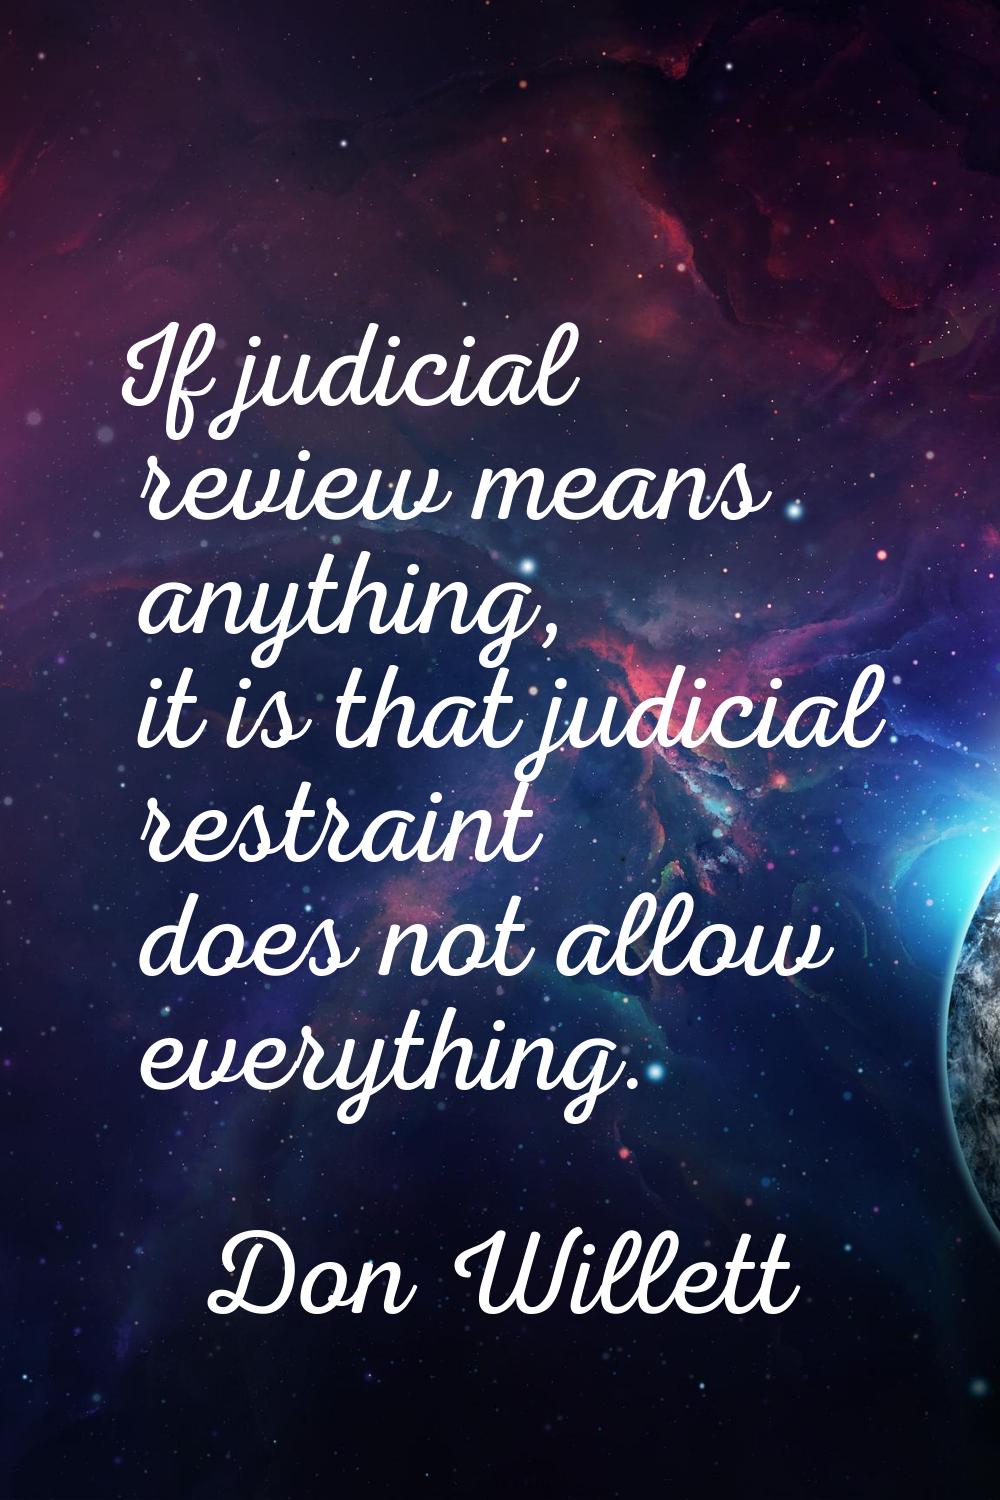 If judicial review means anything, it is that judicial restraint does not allow everything.